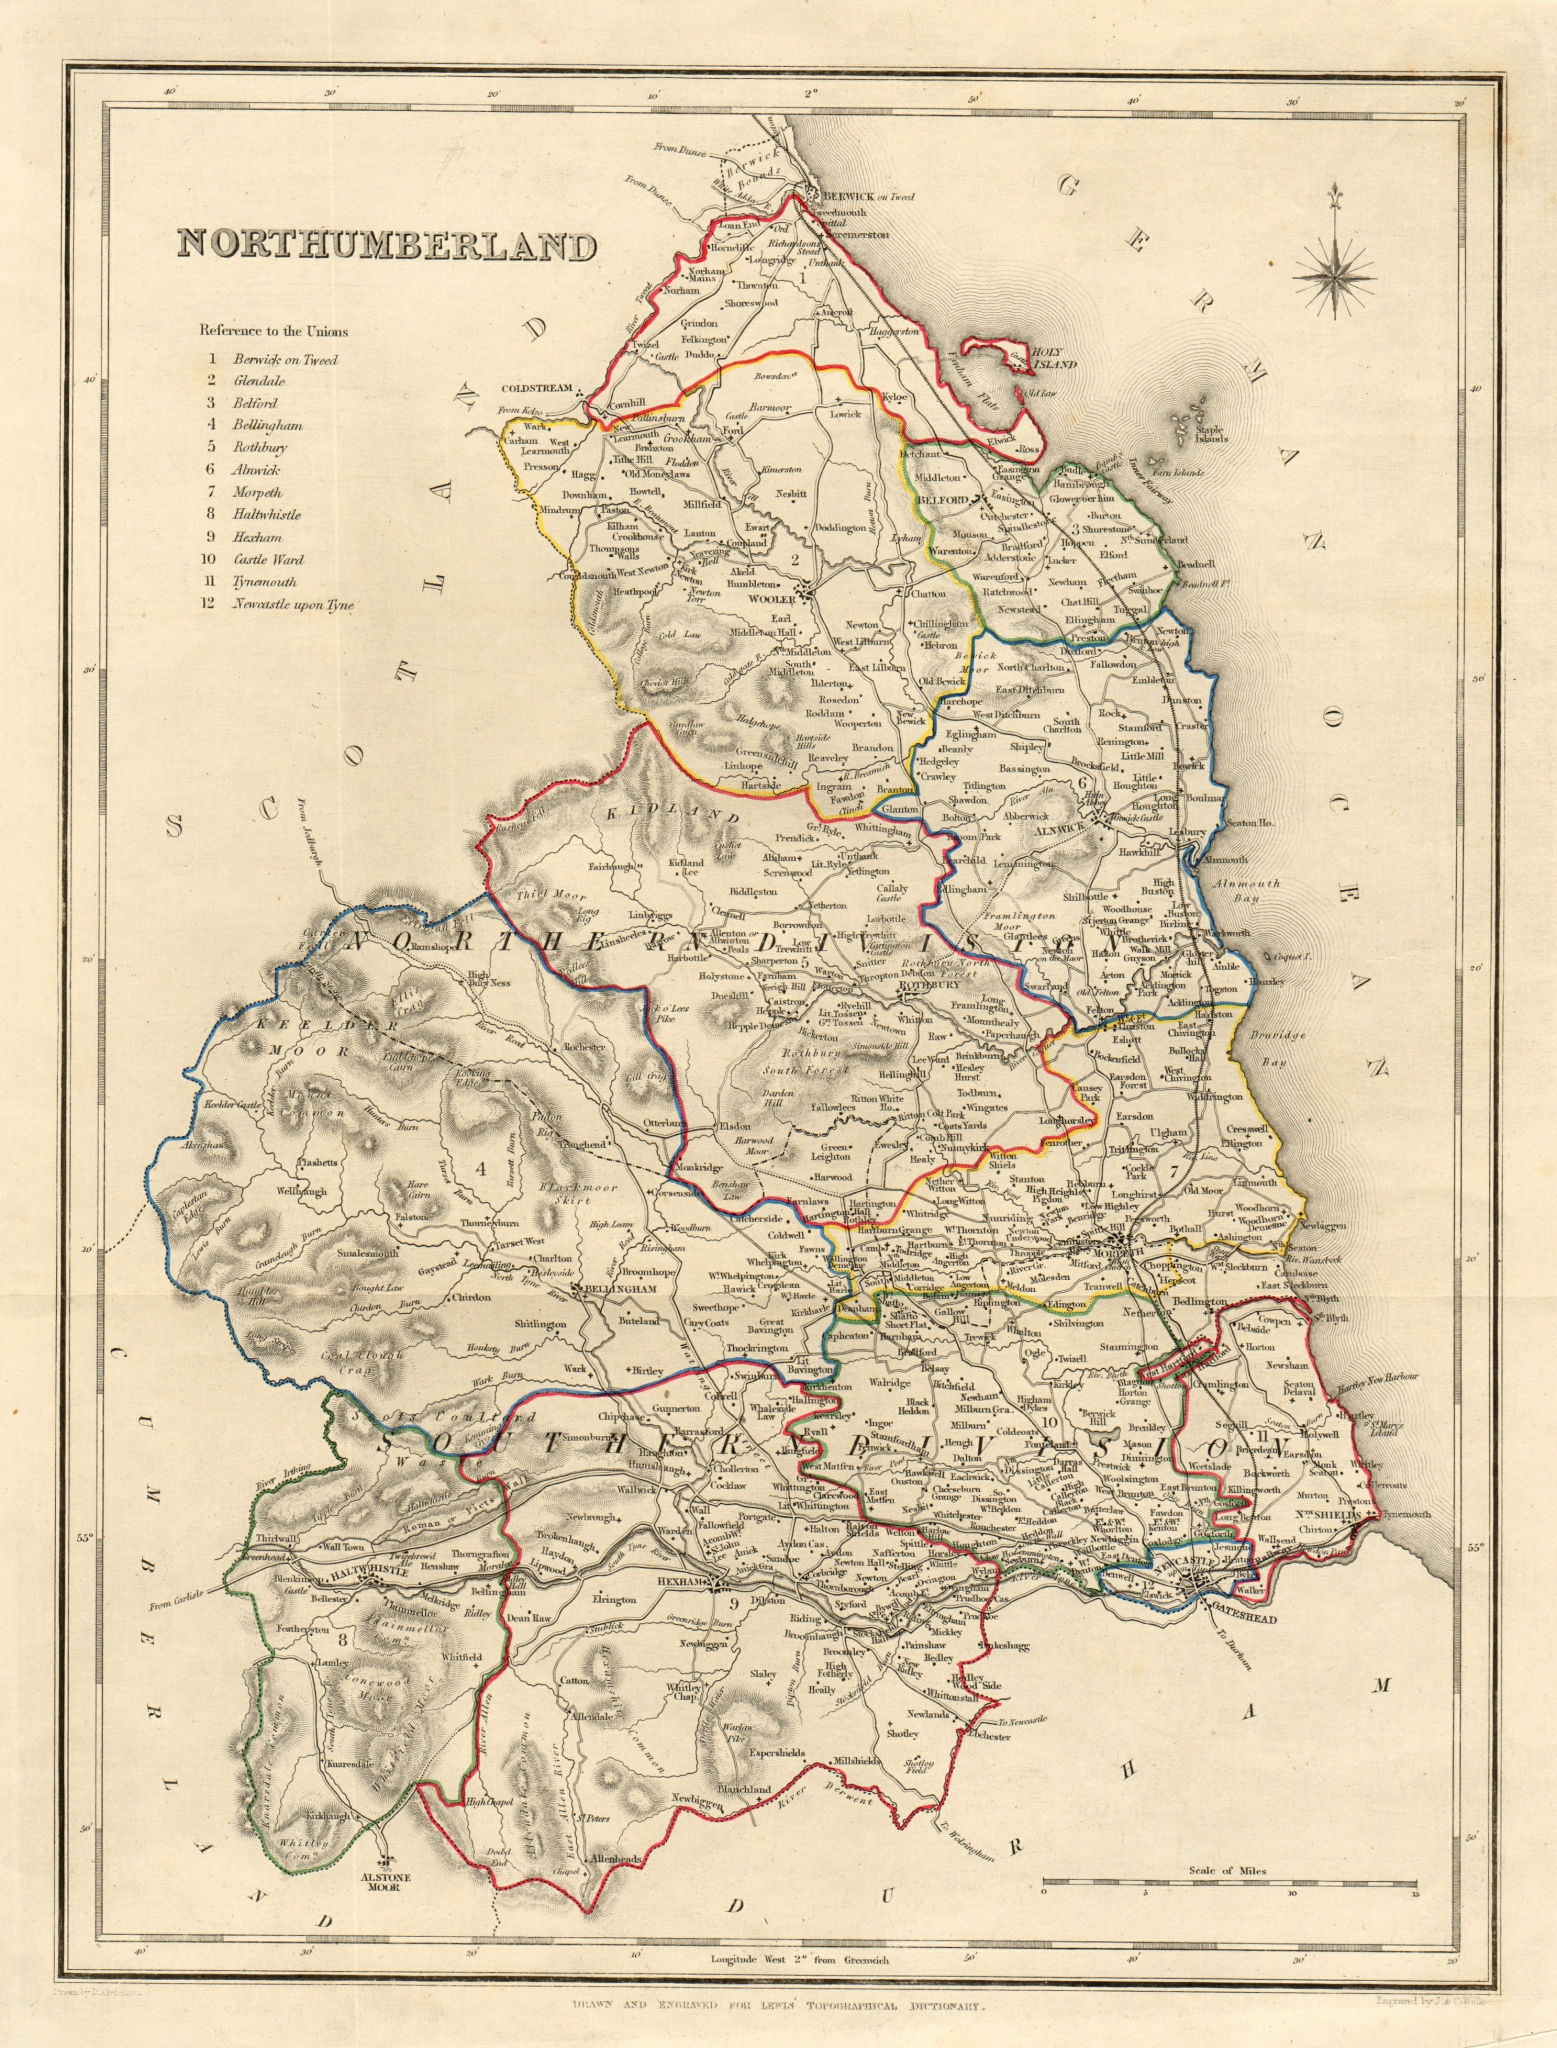 Antique county map of NORTHUMBERLAND by Creighton & Walker for Lewis c1840